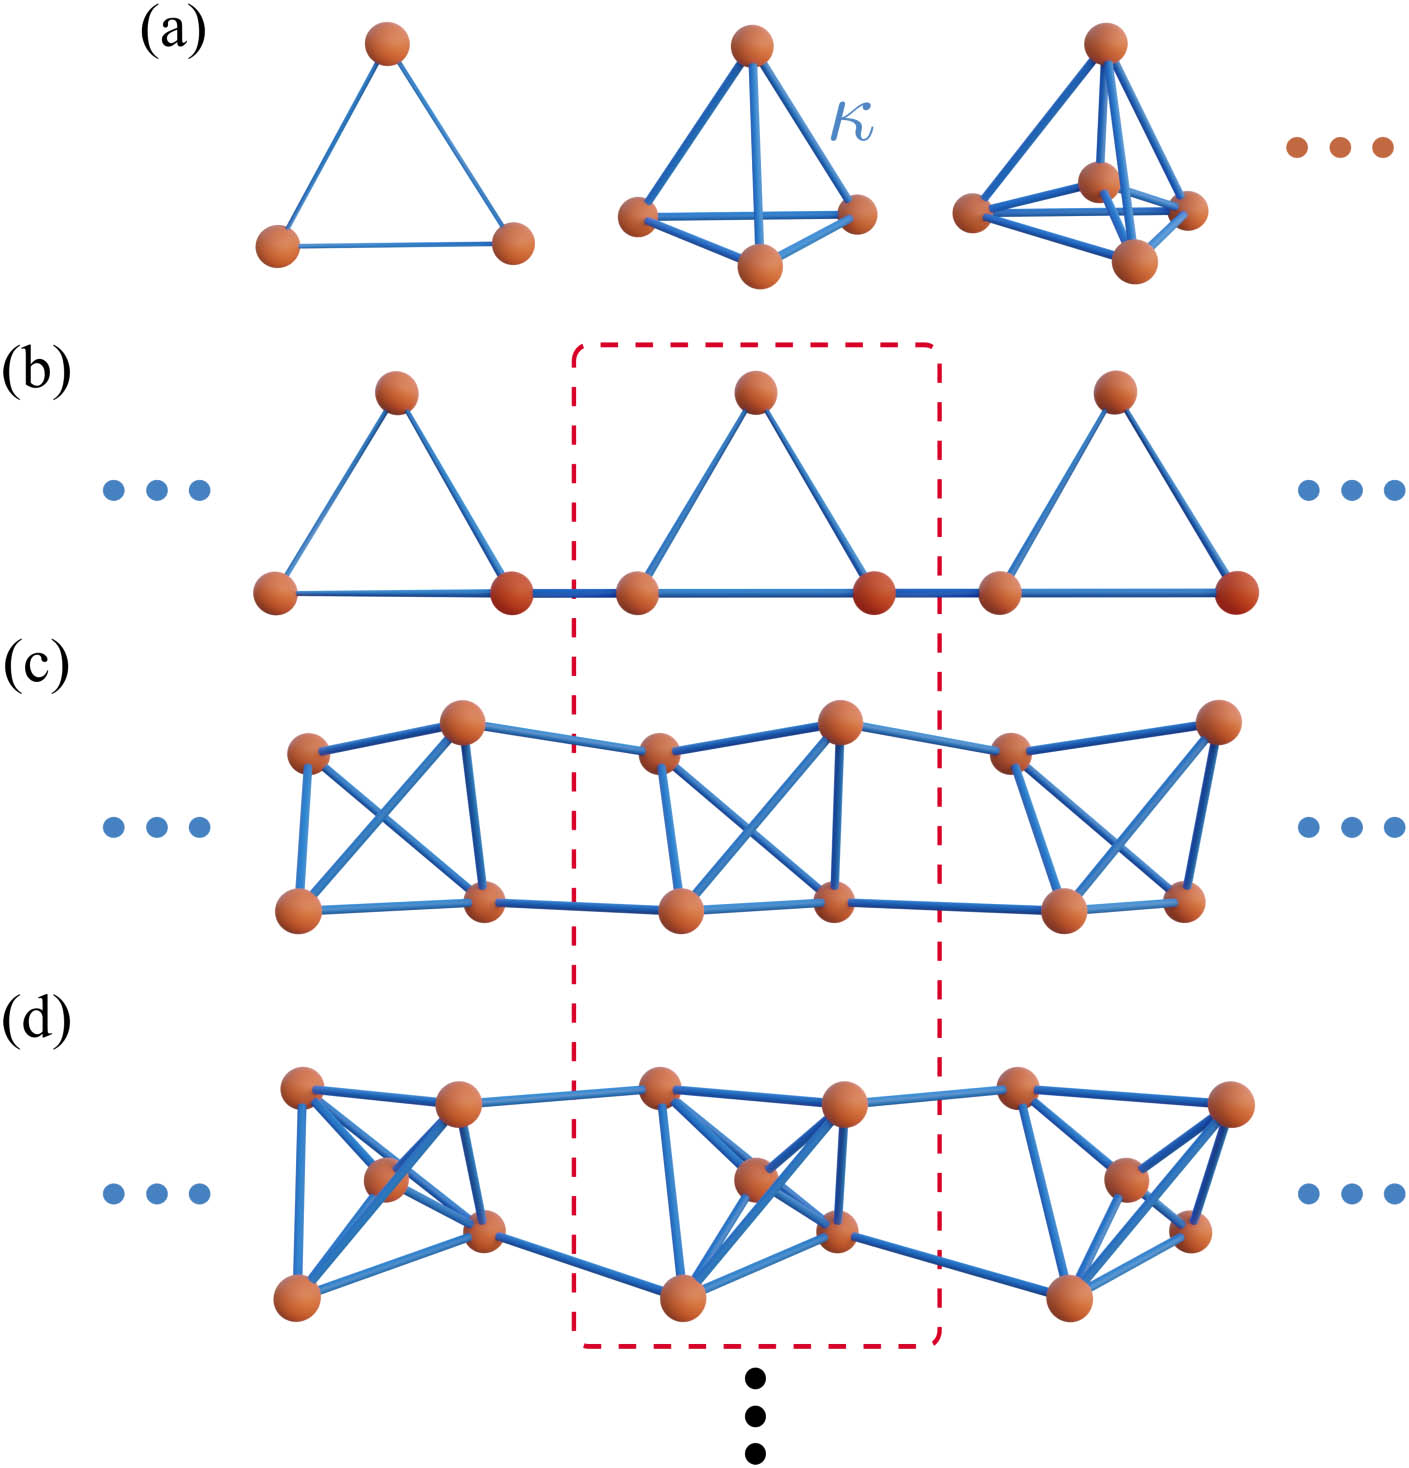 Theoretical tight-binding hopping model. (a) Schematic of n(n=3, 4, 5…) resonators coupled with each other with uniform hopping amplitude κ. (b)–(d) Bulk model with n sites per unit cell, with uniform hoppings, unit cells framed in red dashed box.